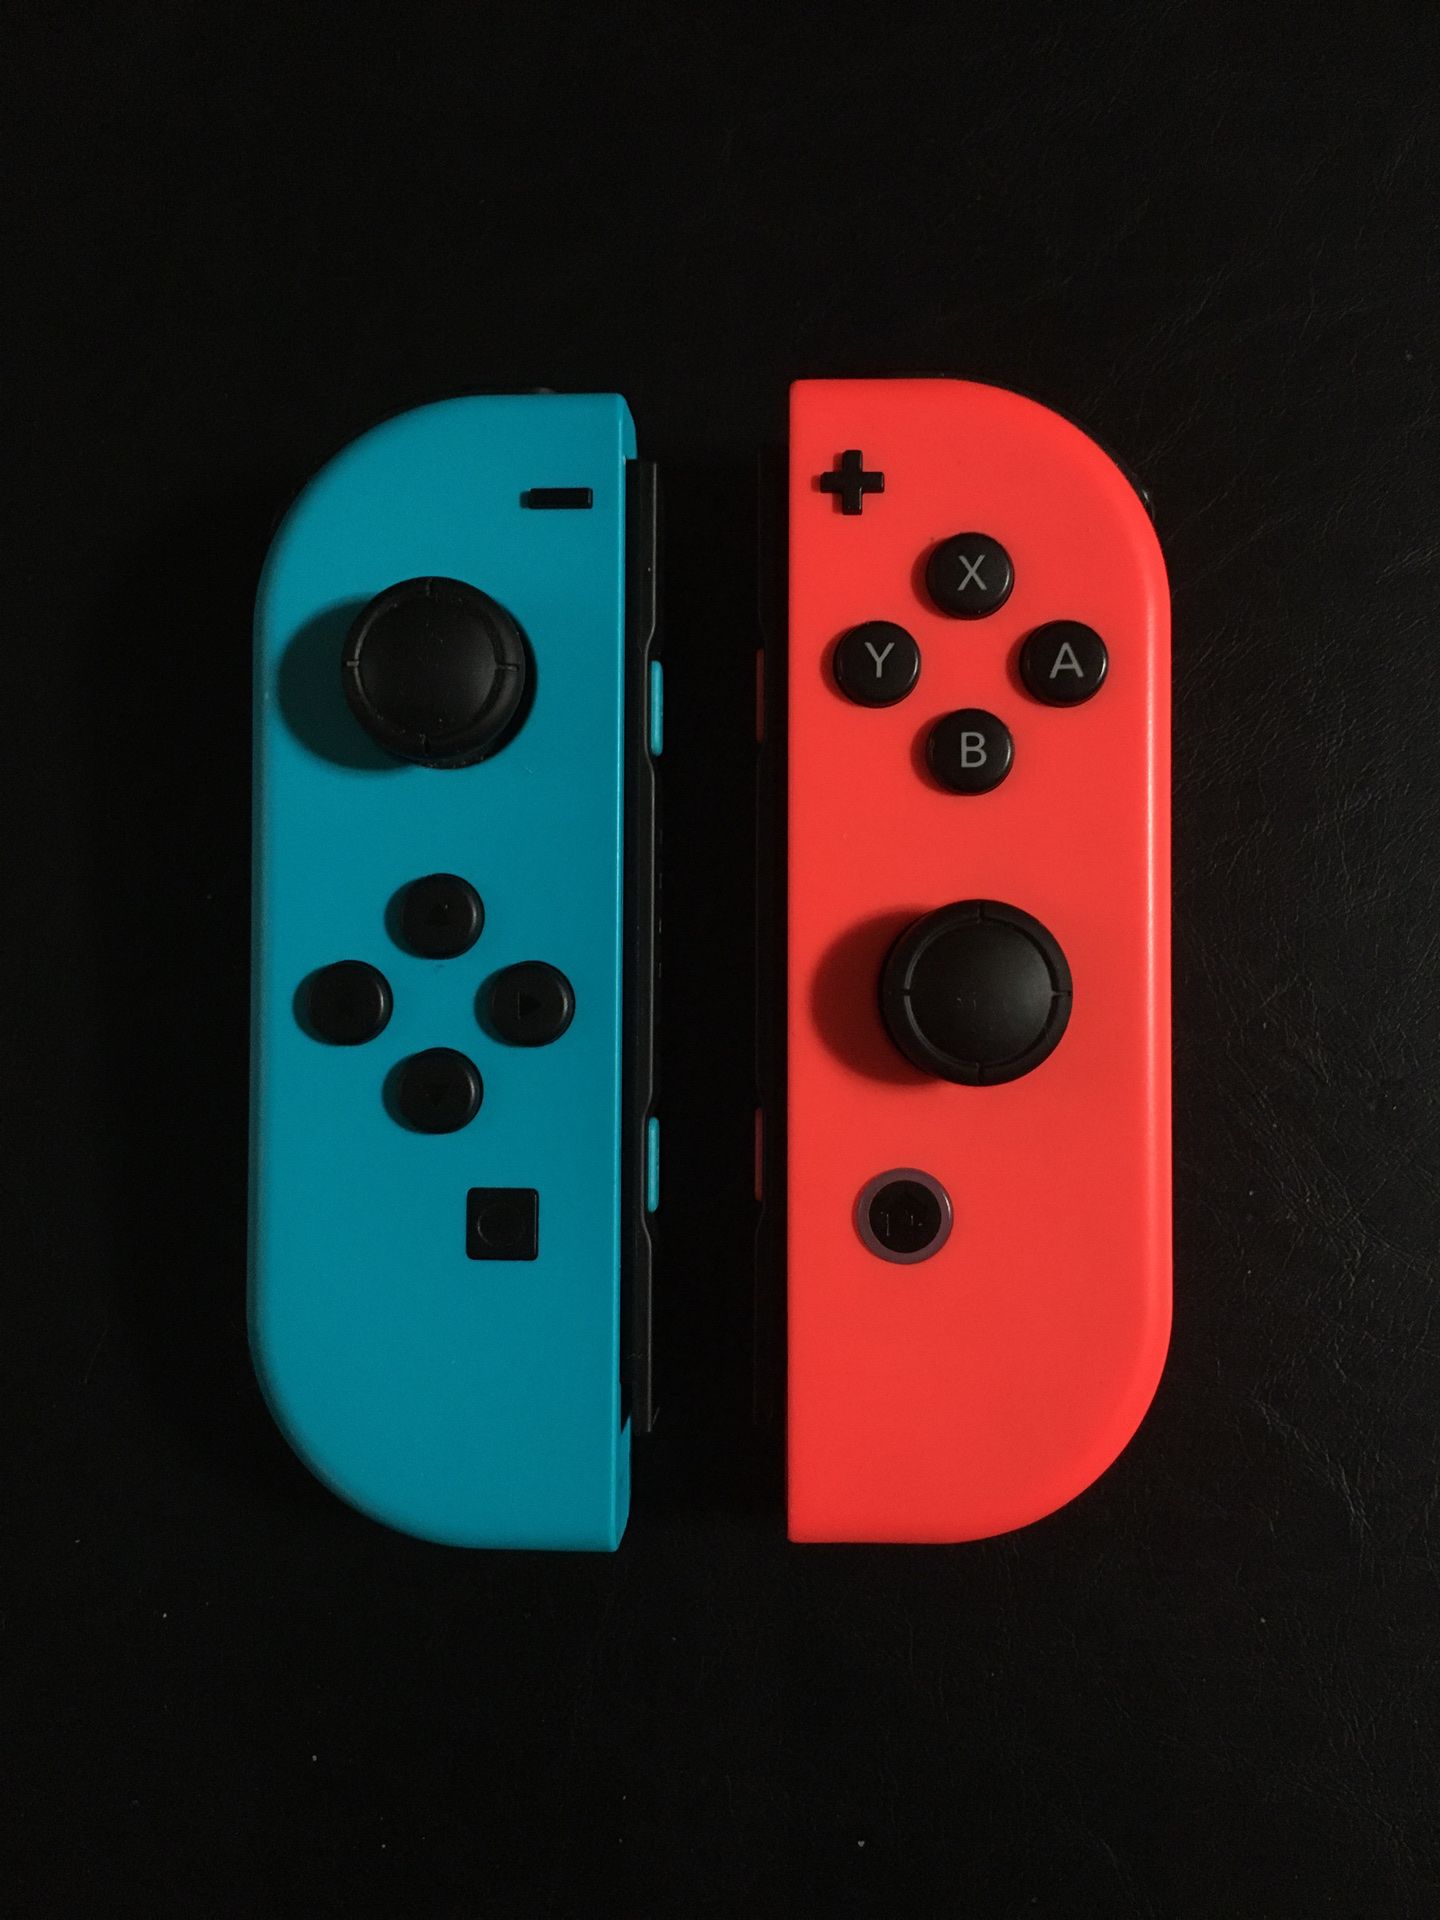 Pair of neon red/blue joy-cons for Nintendo Switch